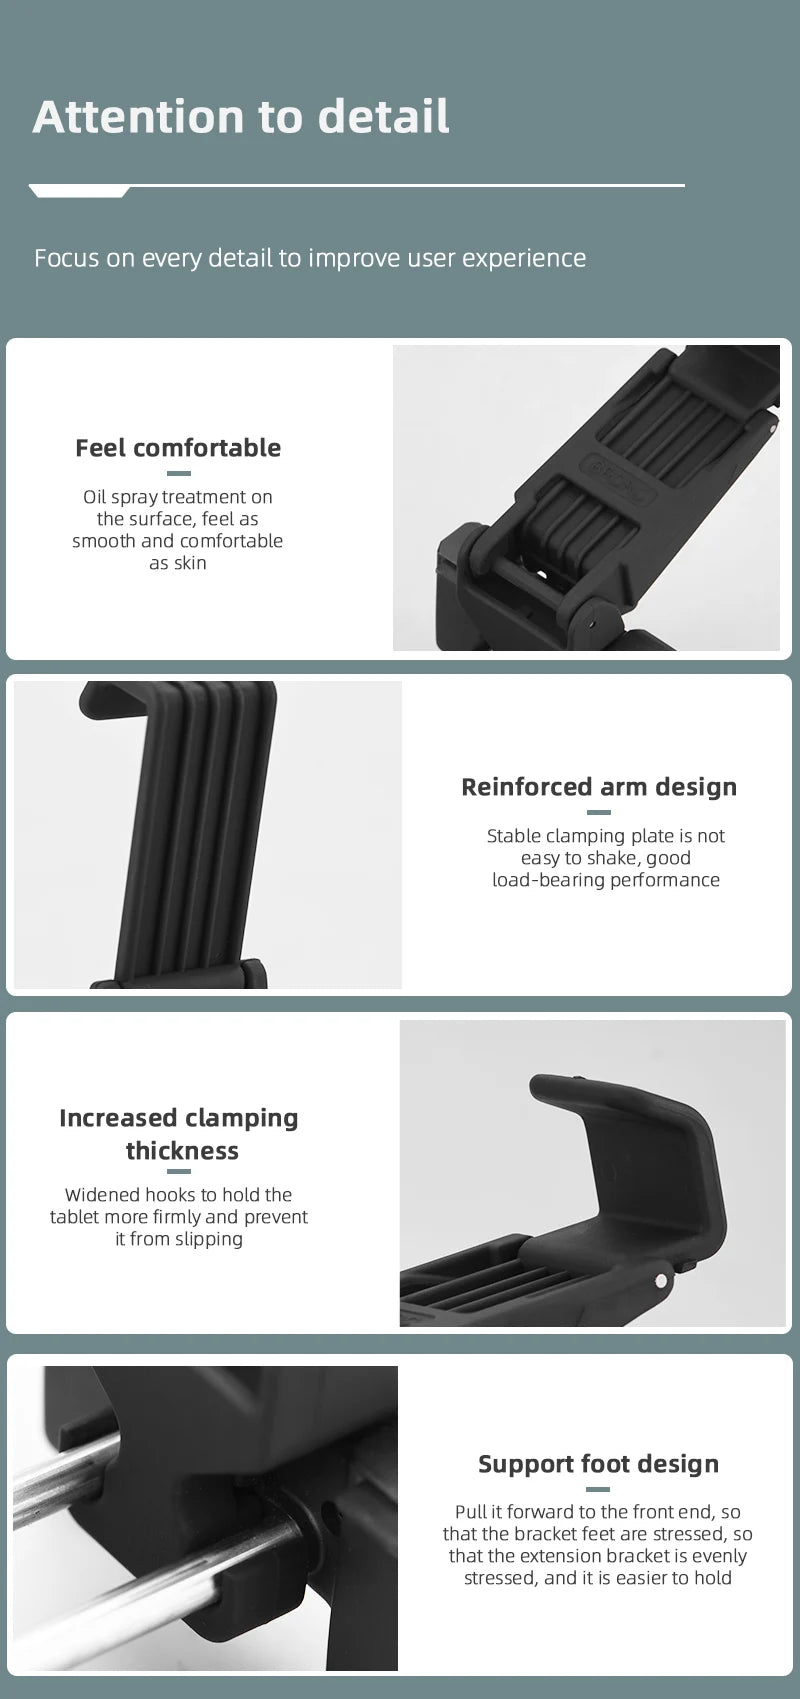 Tablet Holder, tablet is designed to be able to be held more firmly and prevent it from slipping